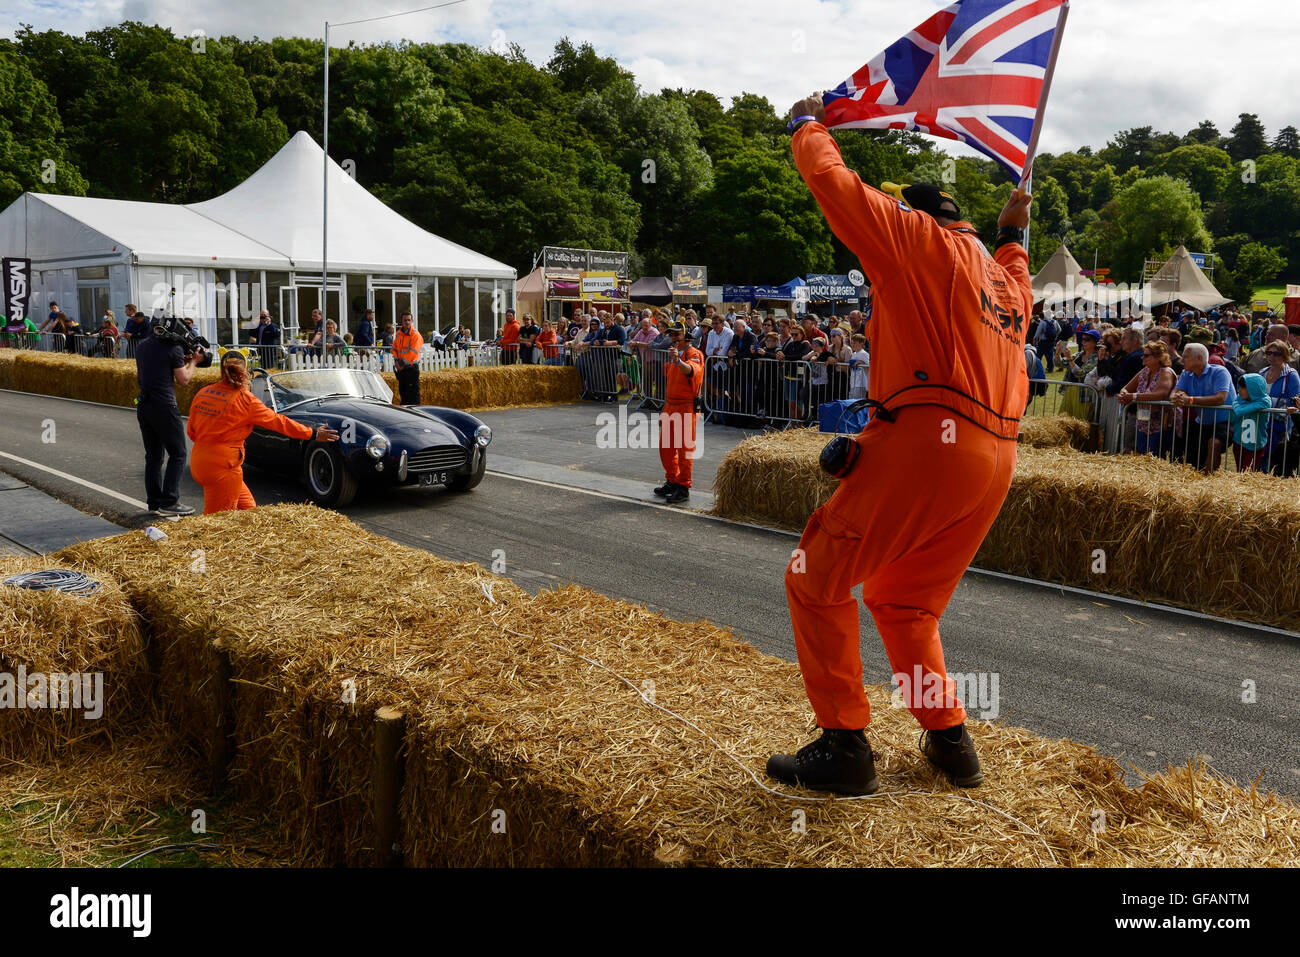 Carfest North, Bolesworth, Cheshire, UK. 30th July 2016. An AC Cobra at the start of the track sprint. The event is the brainchild of Chris Evans and features 3 days of cars, music and entertainment with profits being donated to the charity Children in Need. Andrew Paterson/Alamy Live News Stock Photo